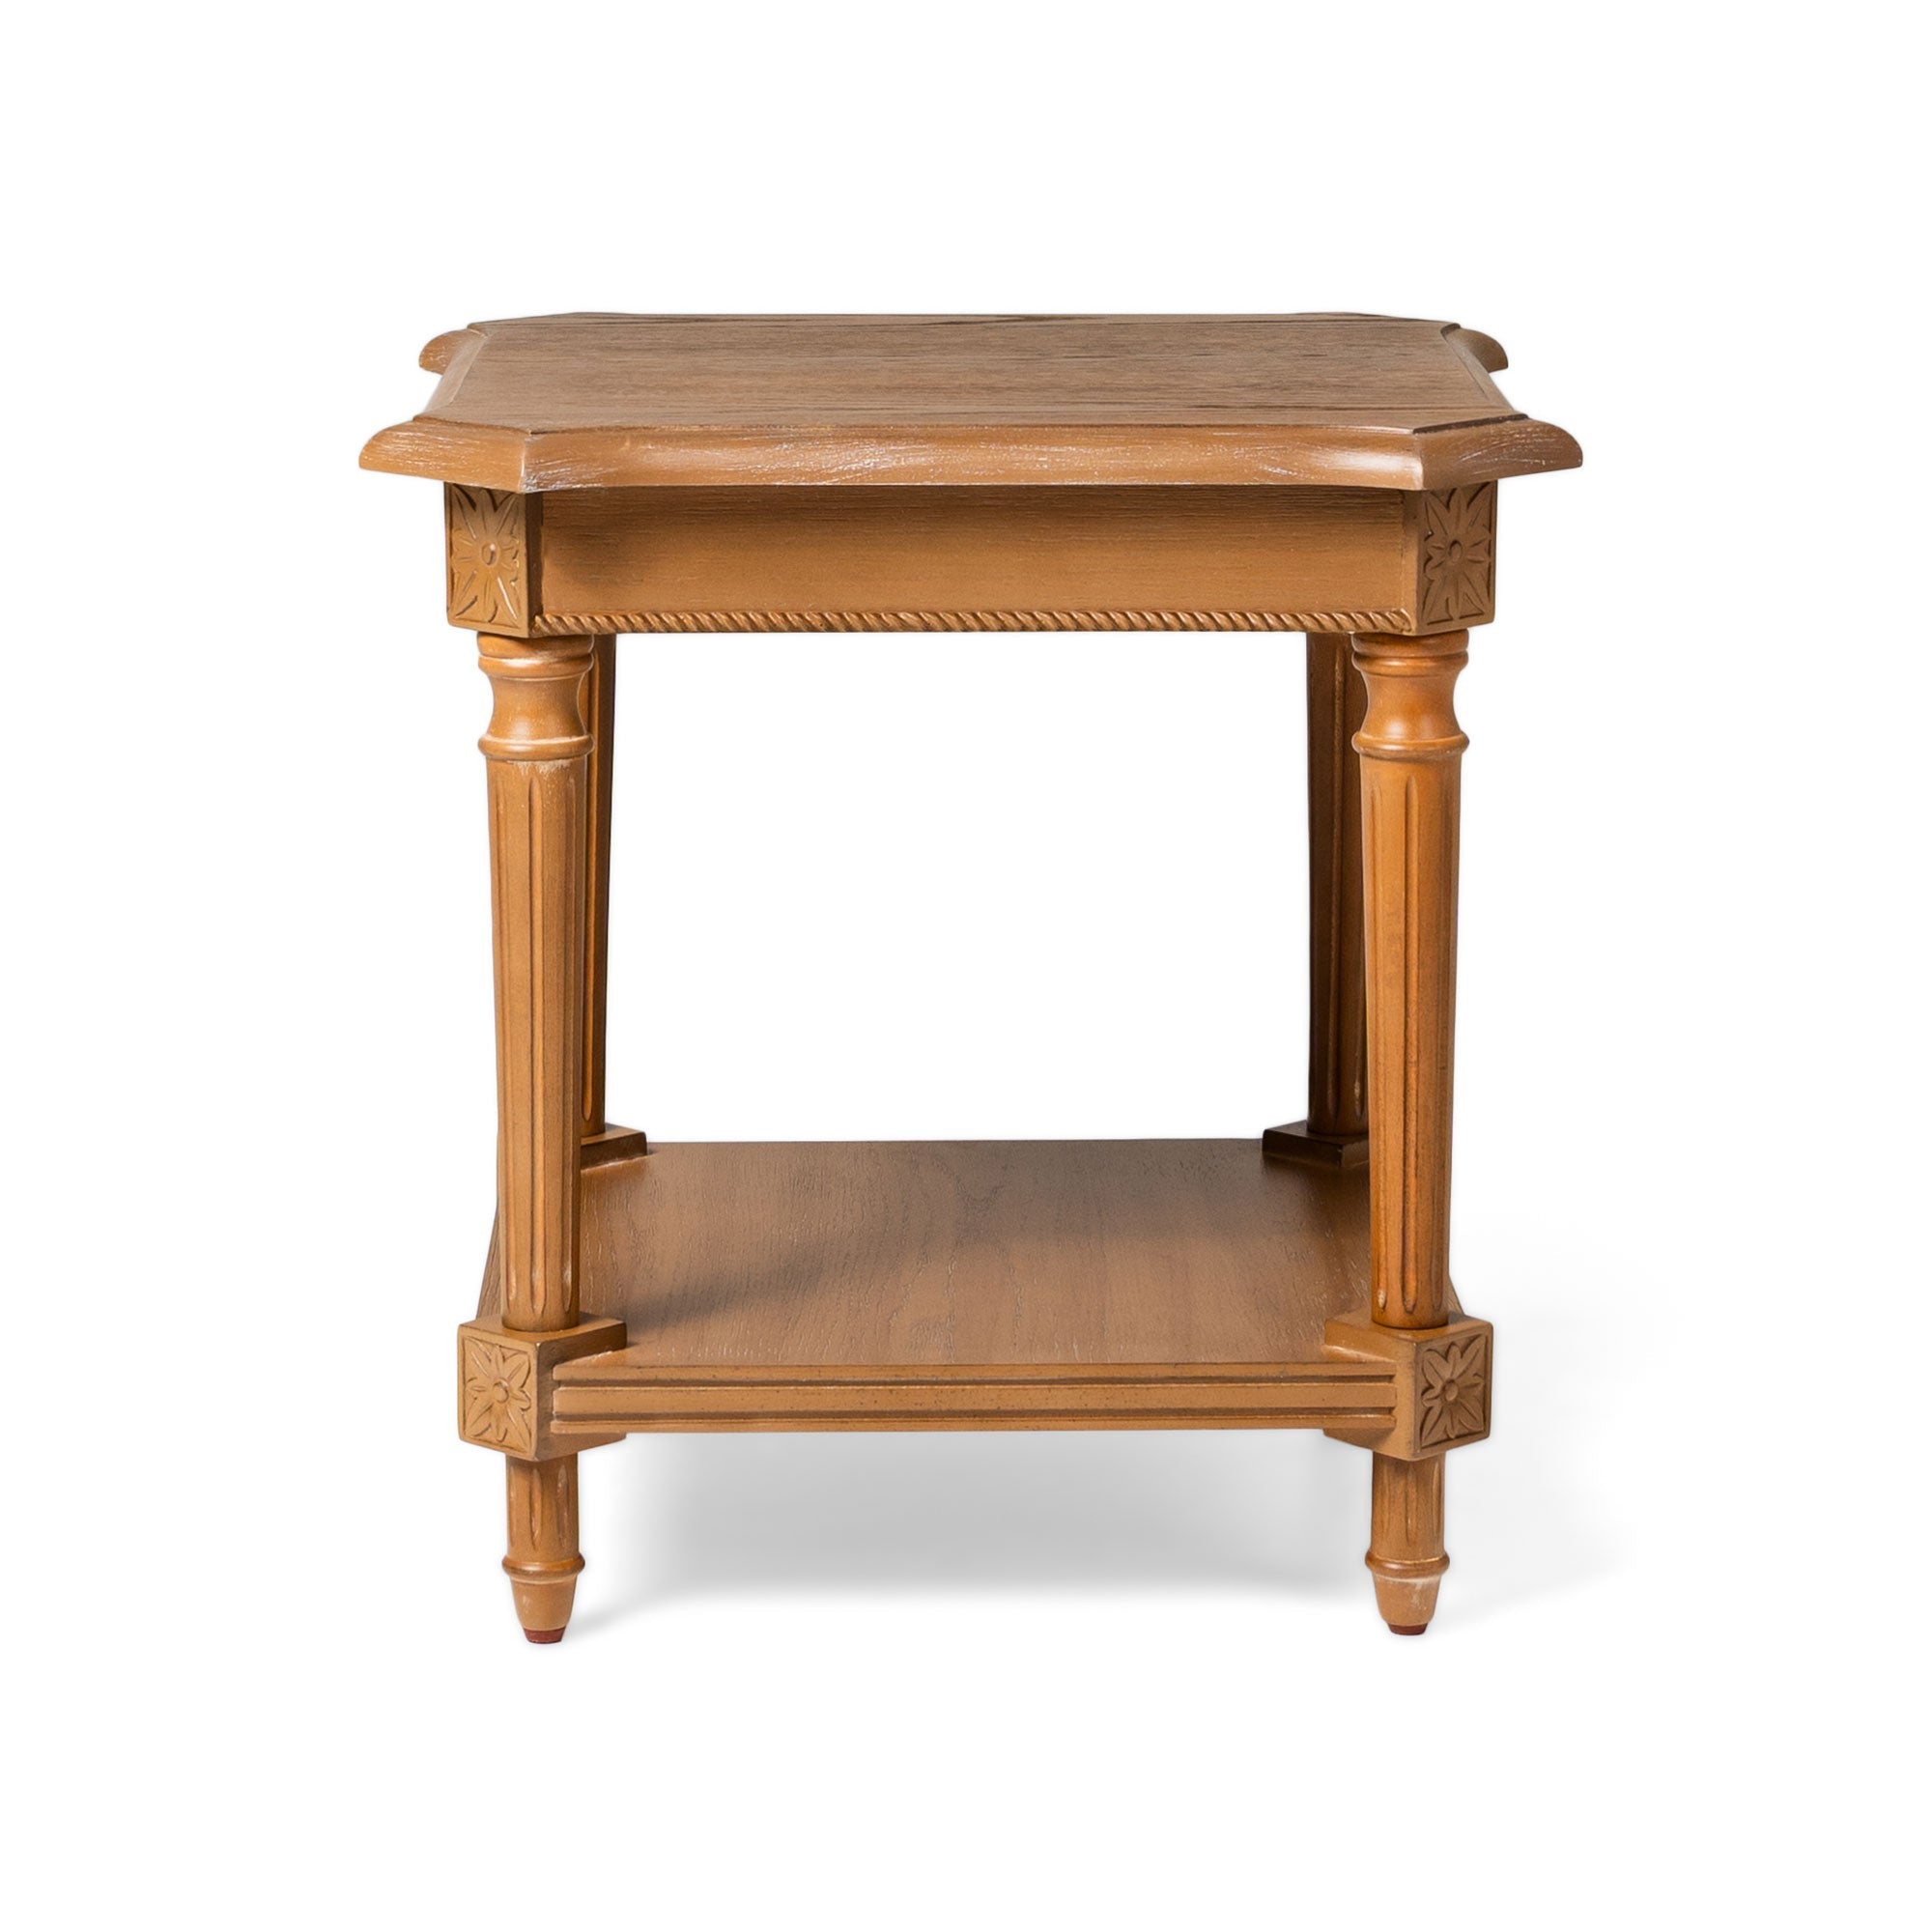 Pullman Traditional Square Wooden Side Table in Antiqued Natural Finish in Accent Tables by Maven Lane